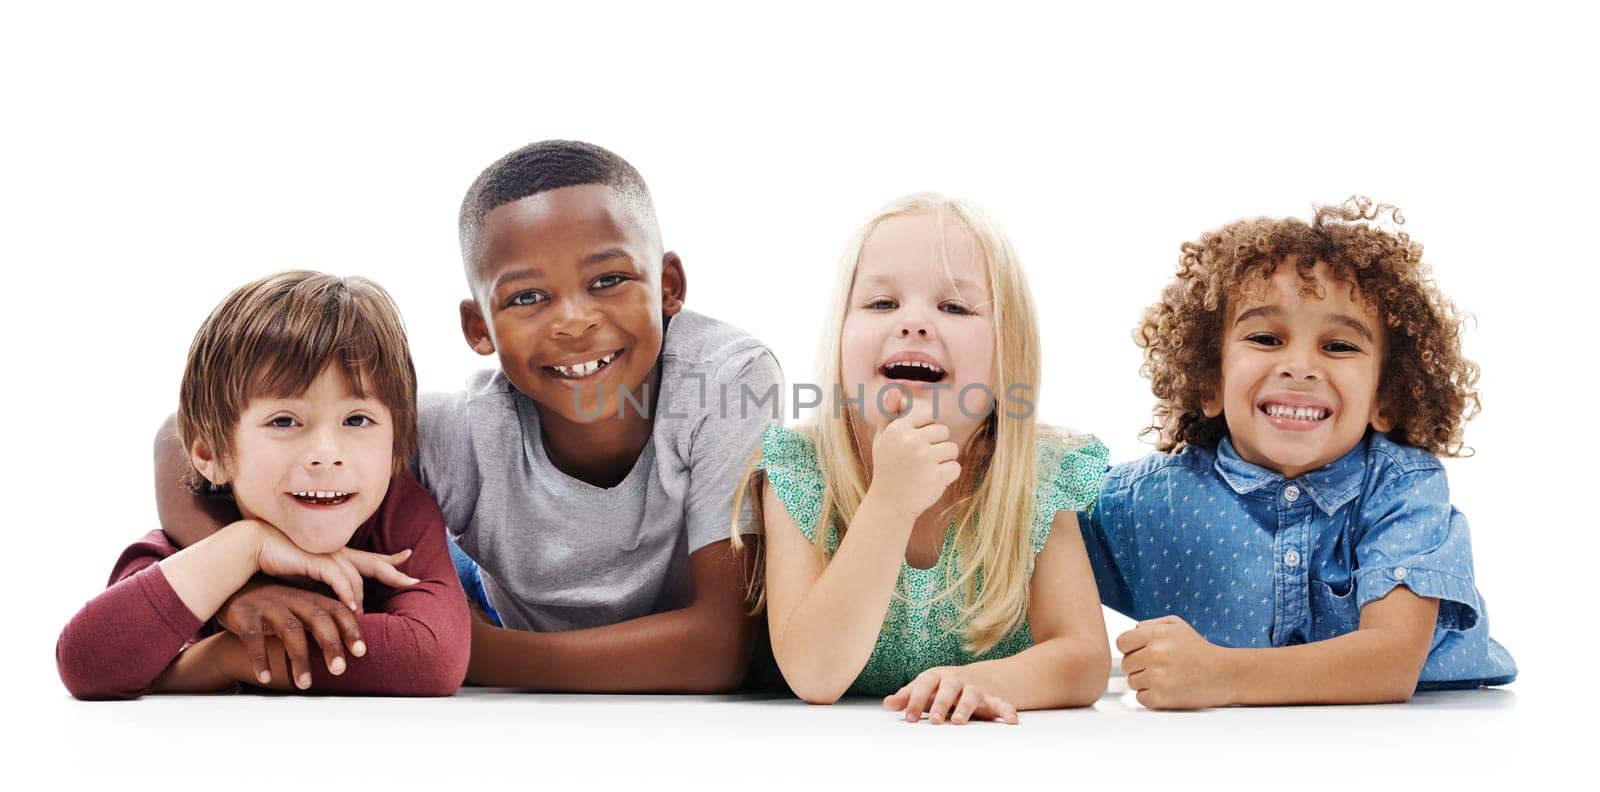 Enjoying their playdate. Studio shot of a group of young friends lying on the floor together against a white background